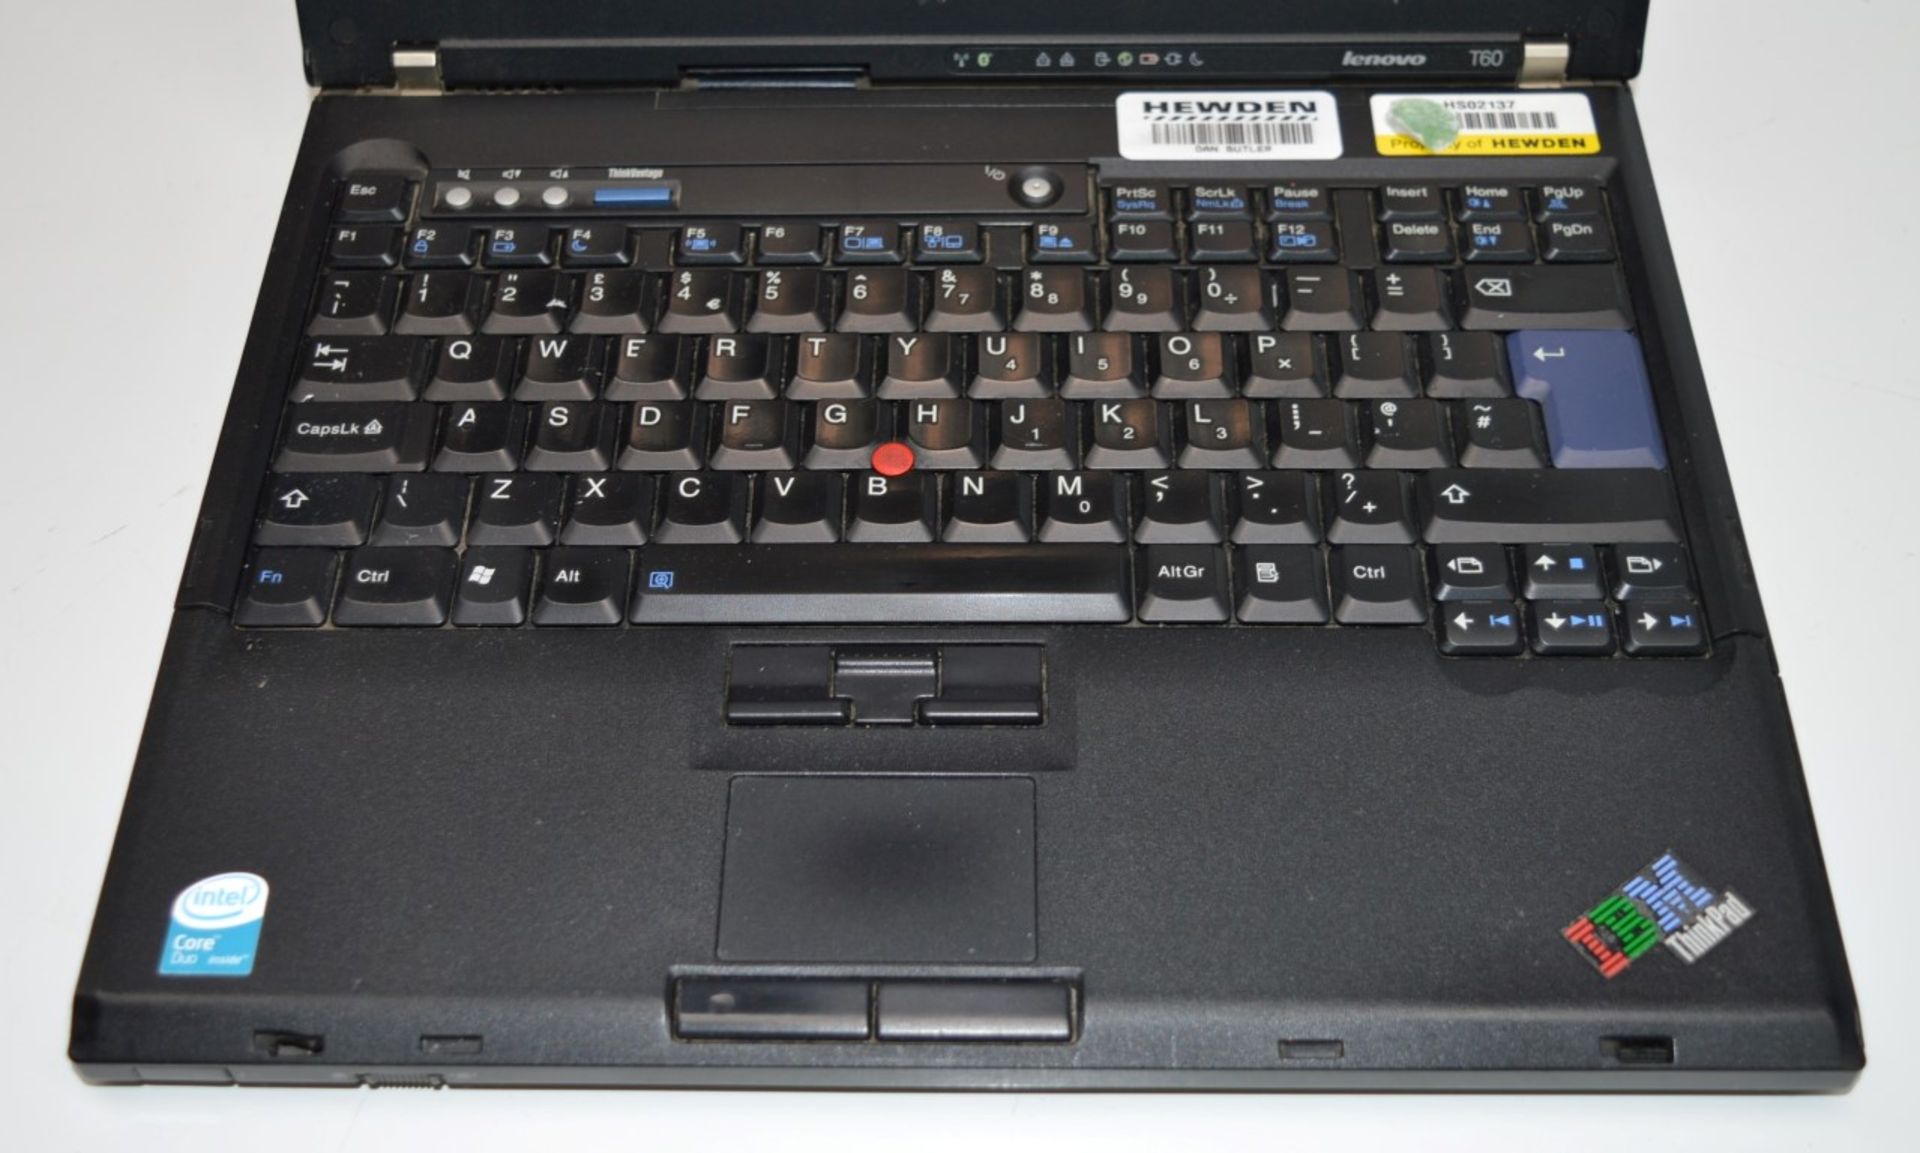 1 x IBM Lenovo T60 14.1 Inch Laptop Computer With Intel Core Duo 1.66ghz Processor and 4gb Ram - - Image 2 of 5